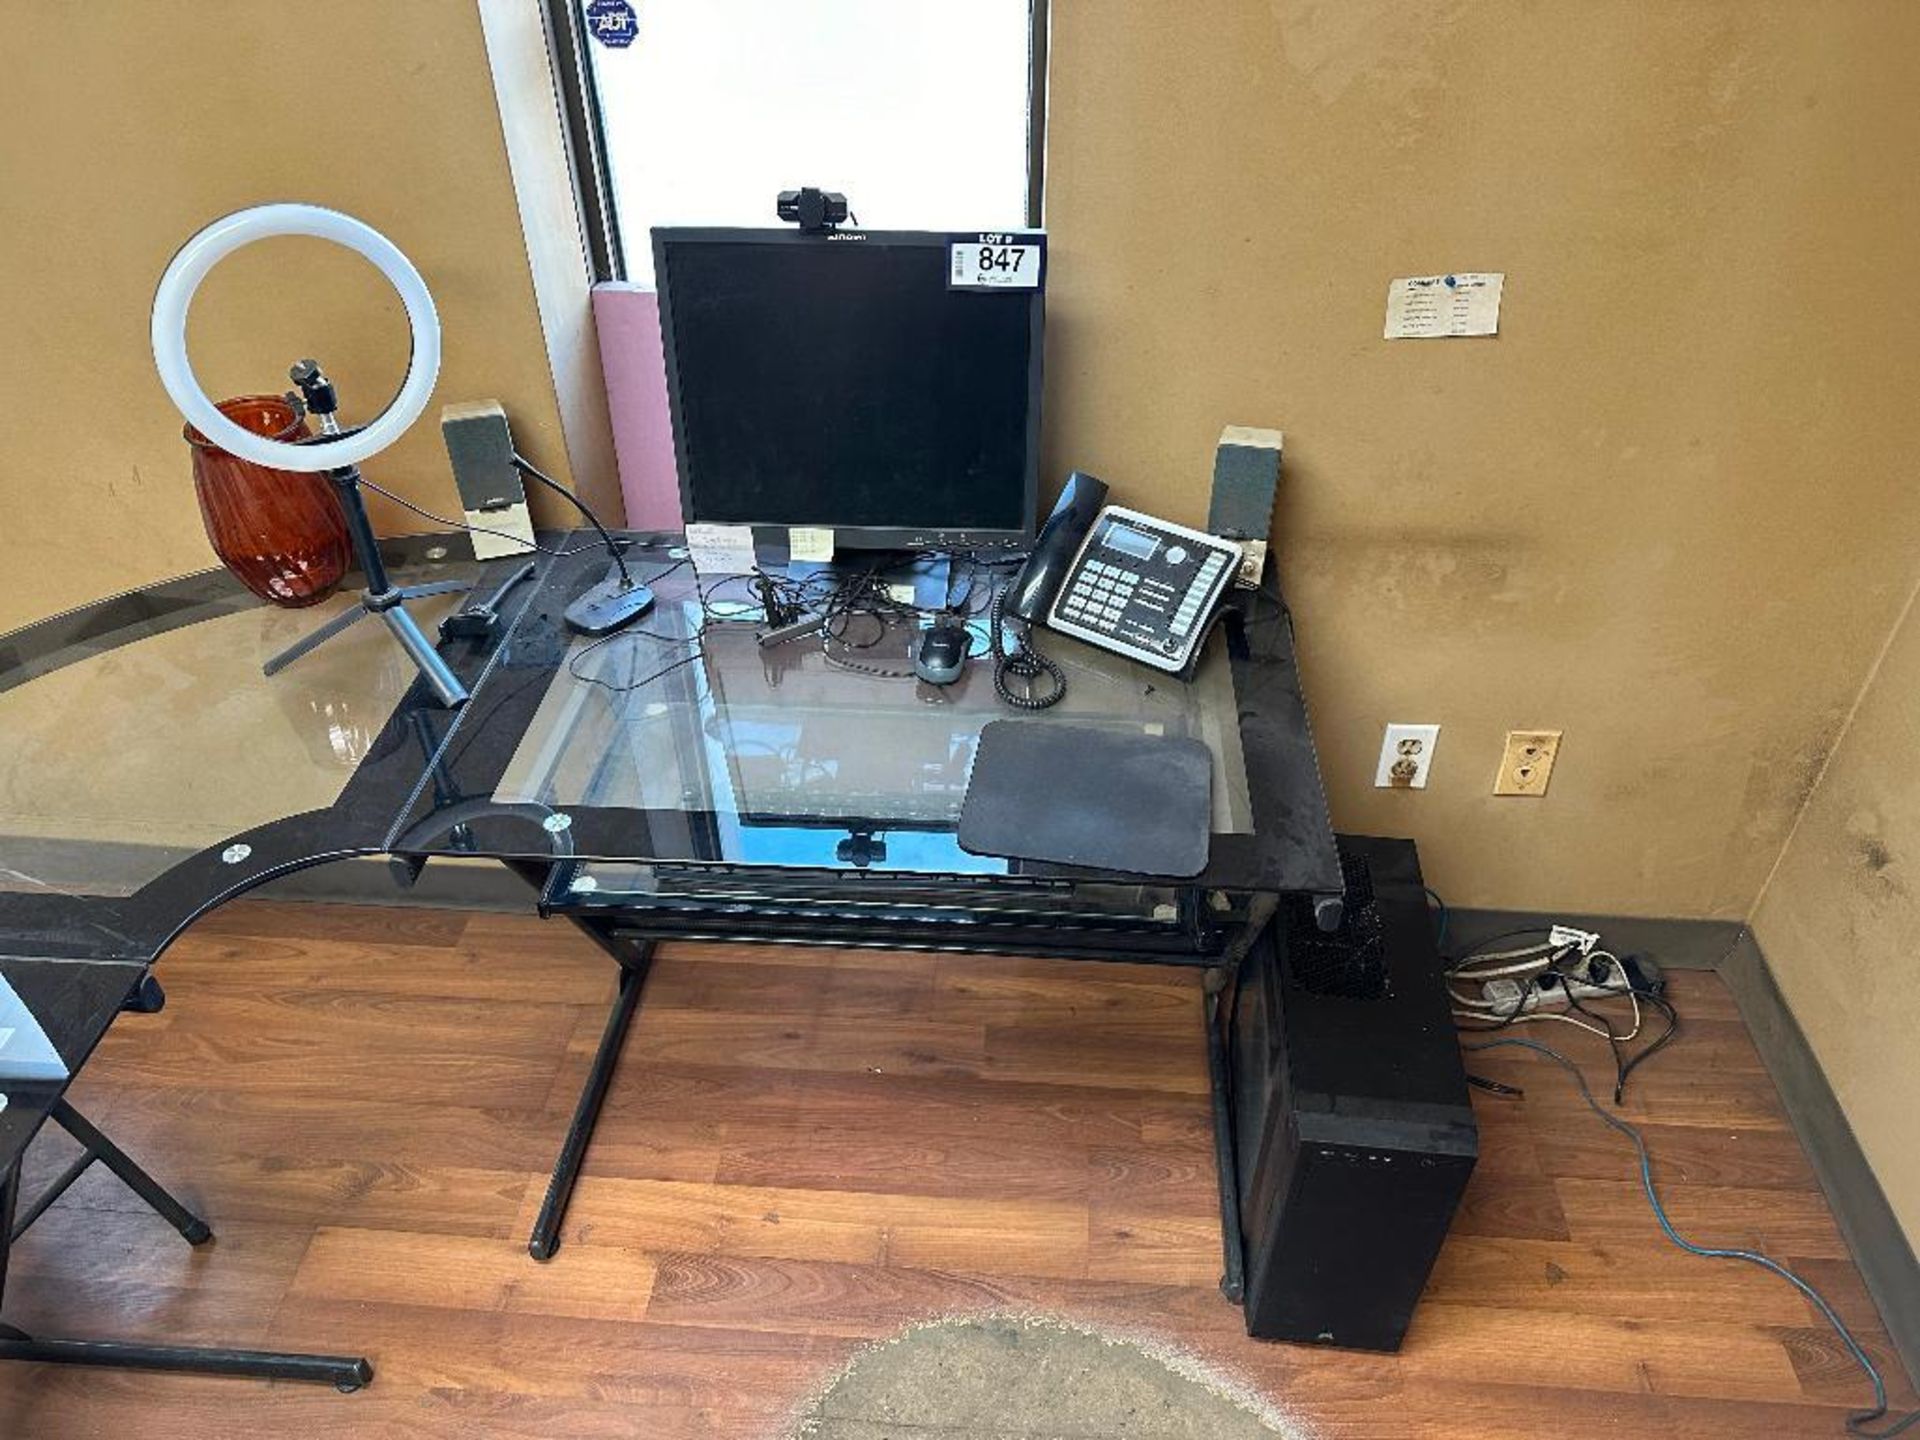 Lot of Computer, Monitor, Phone, Conference Light, Speakers, Mouse, Keyboard, etc.